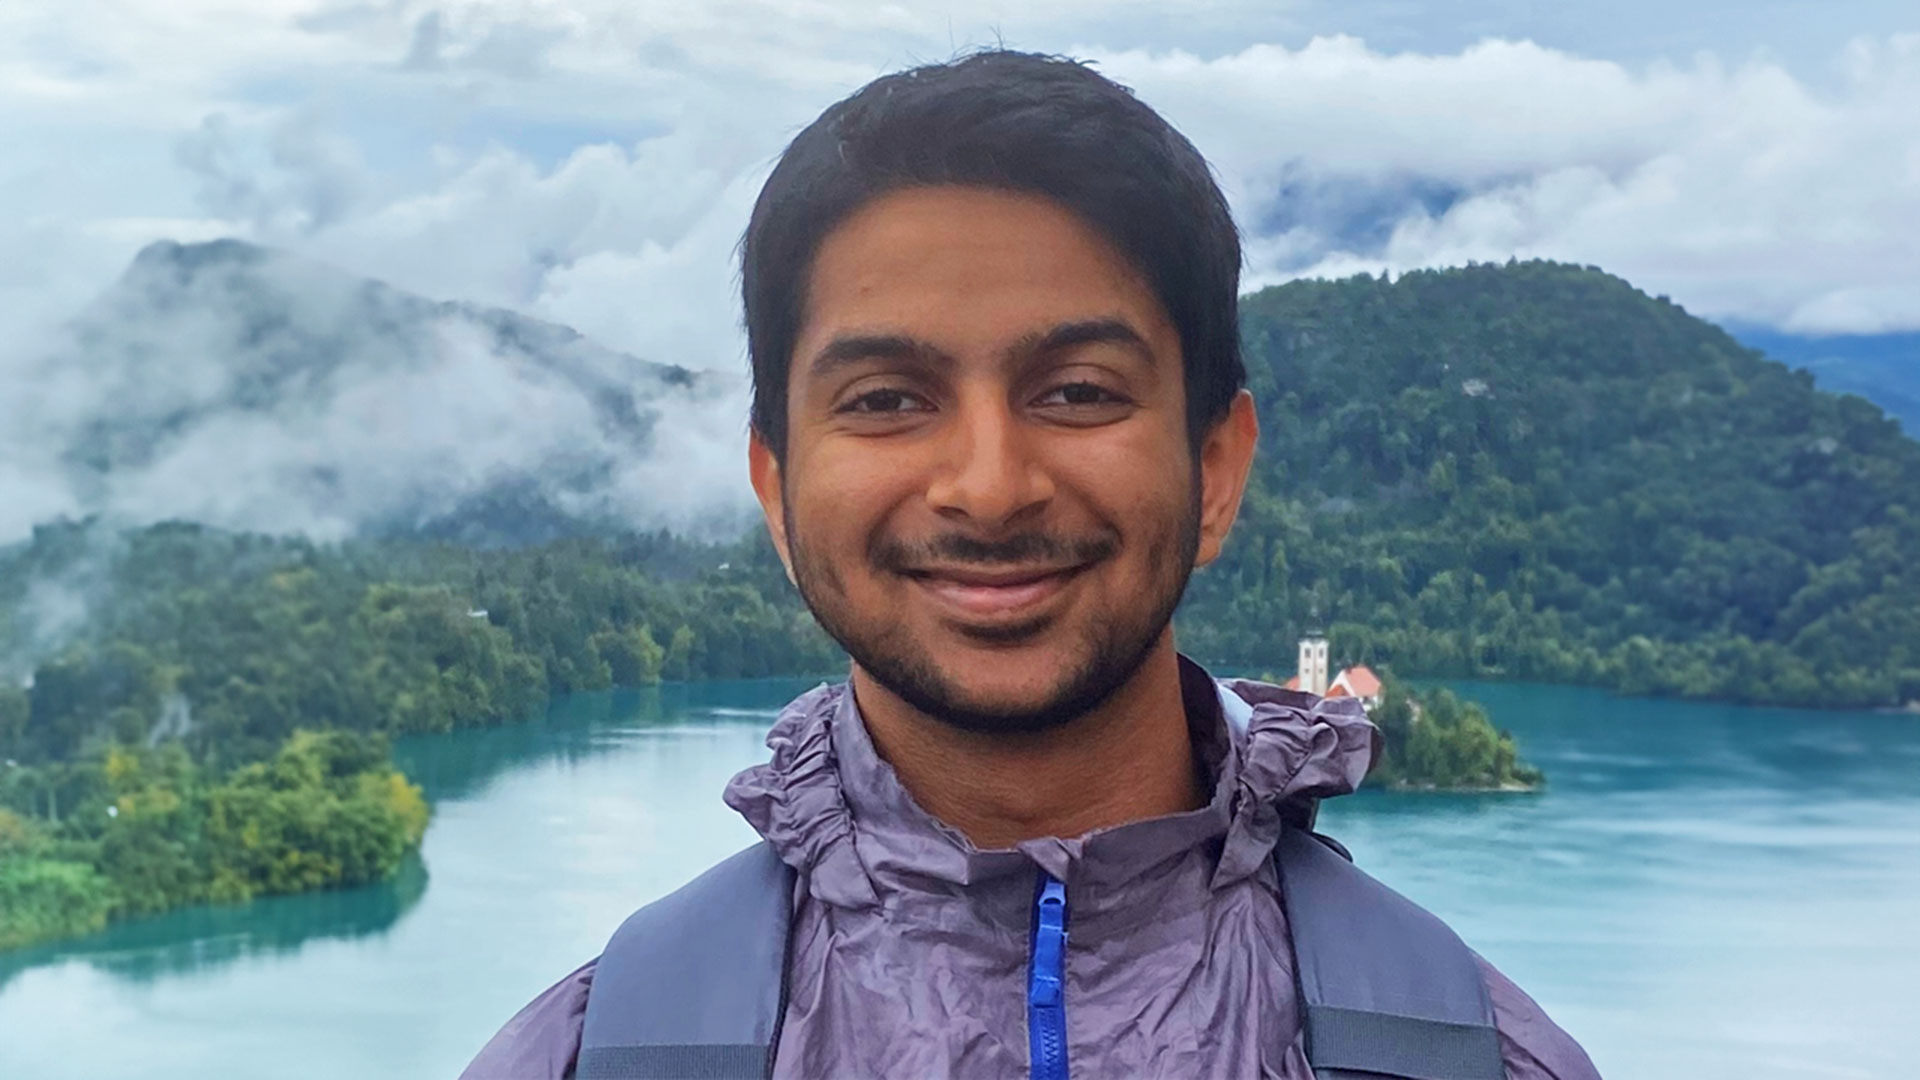 Anand smiling to the camera in front of a backdrop of a lake.